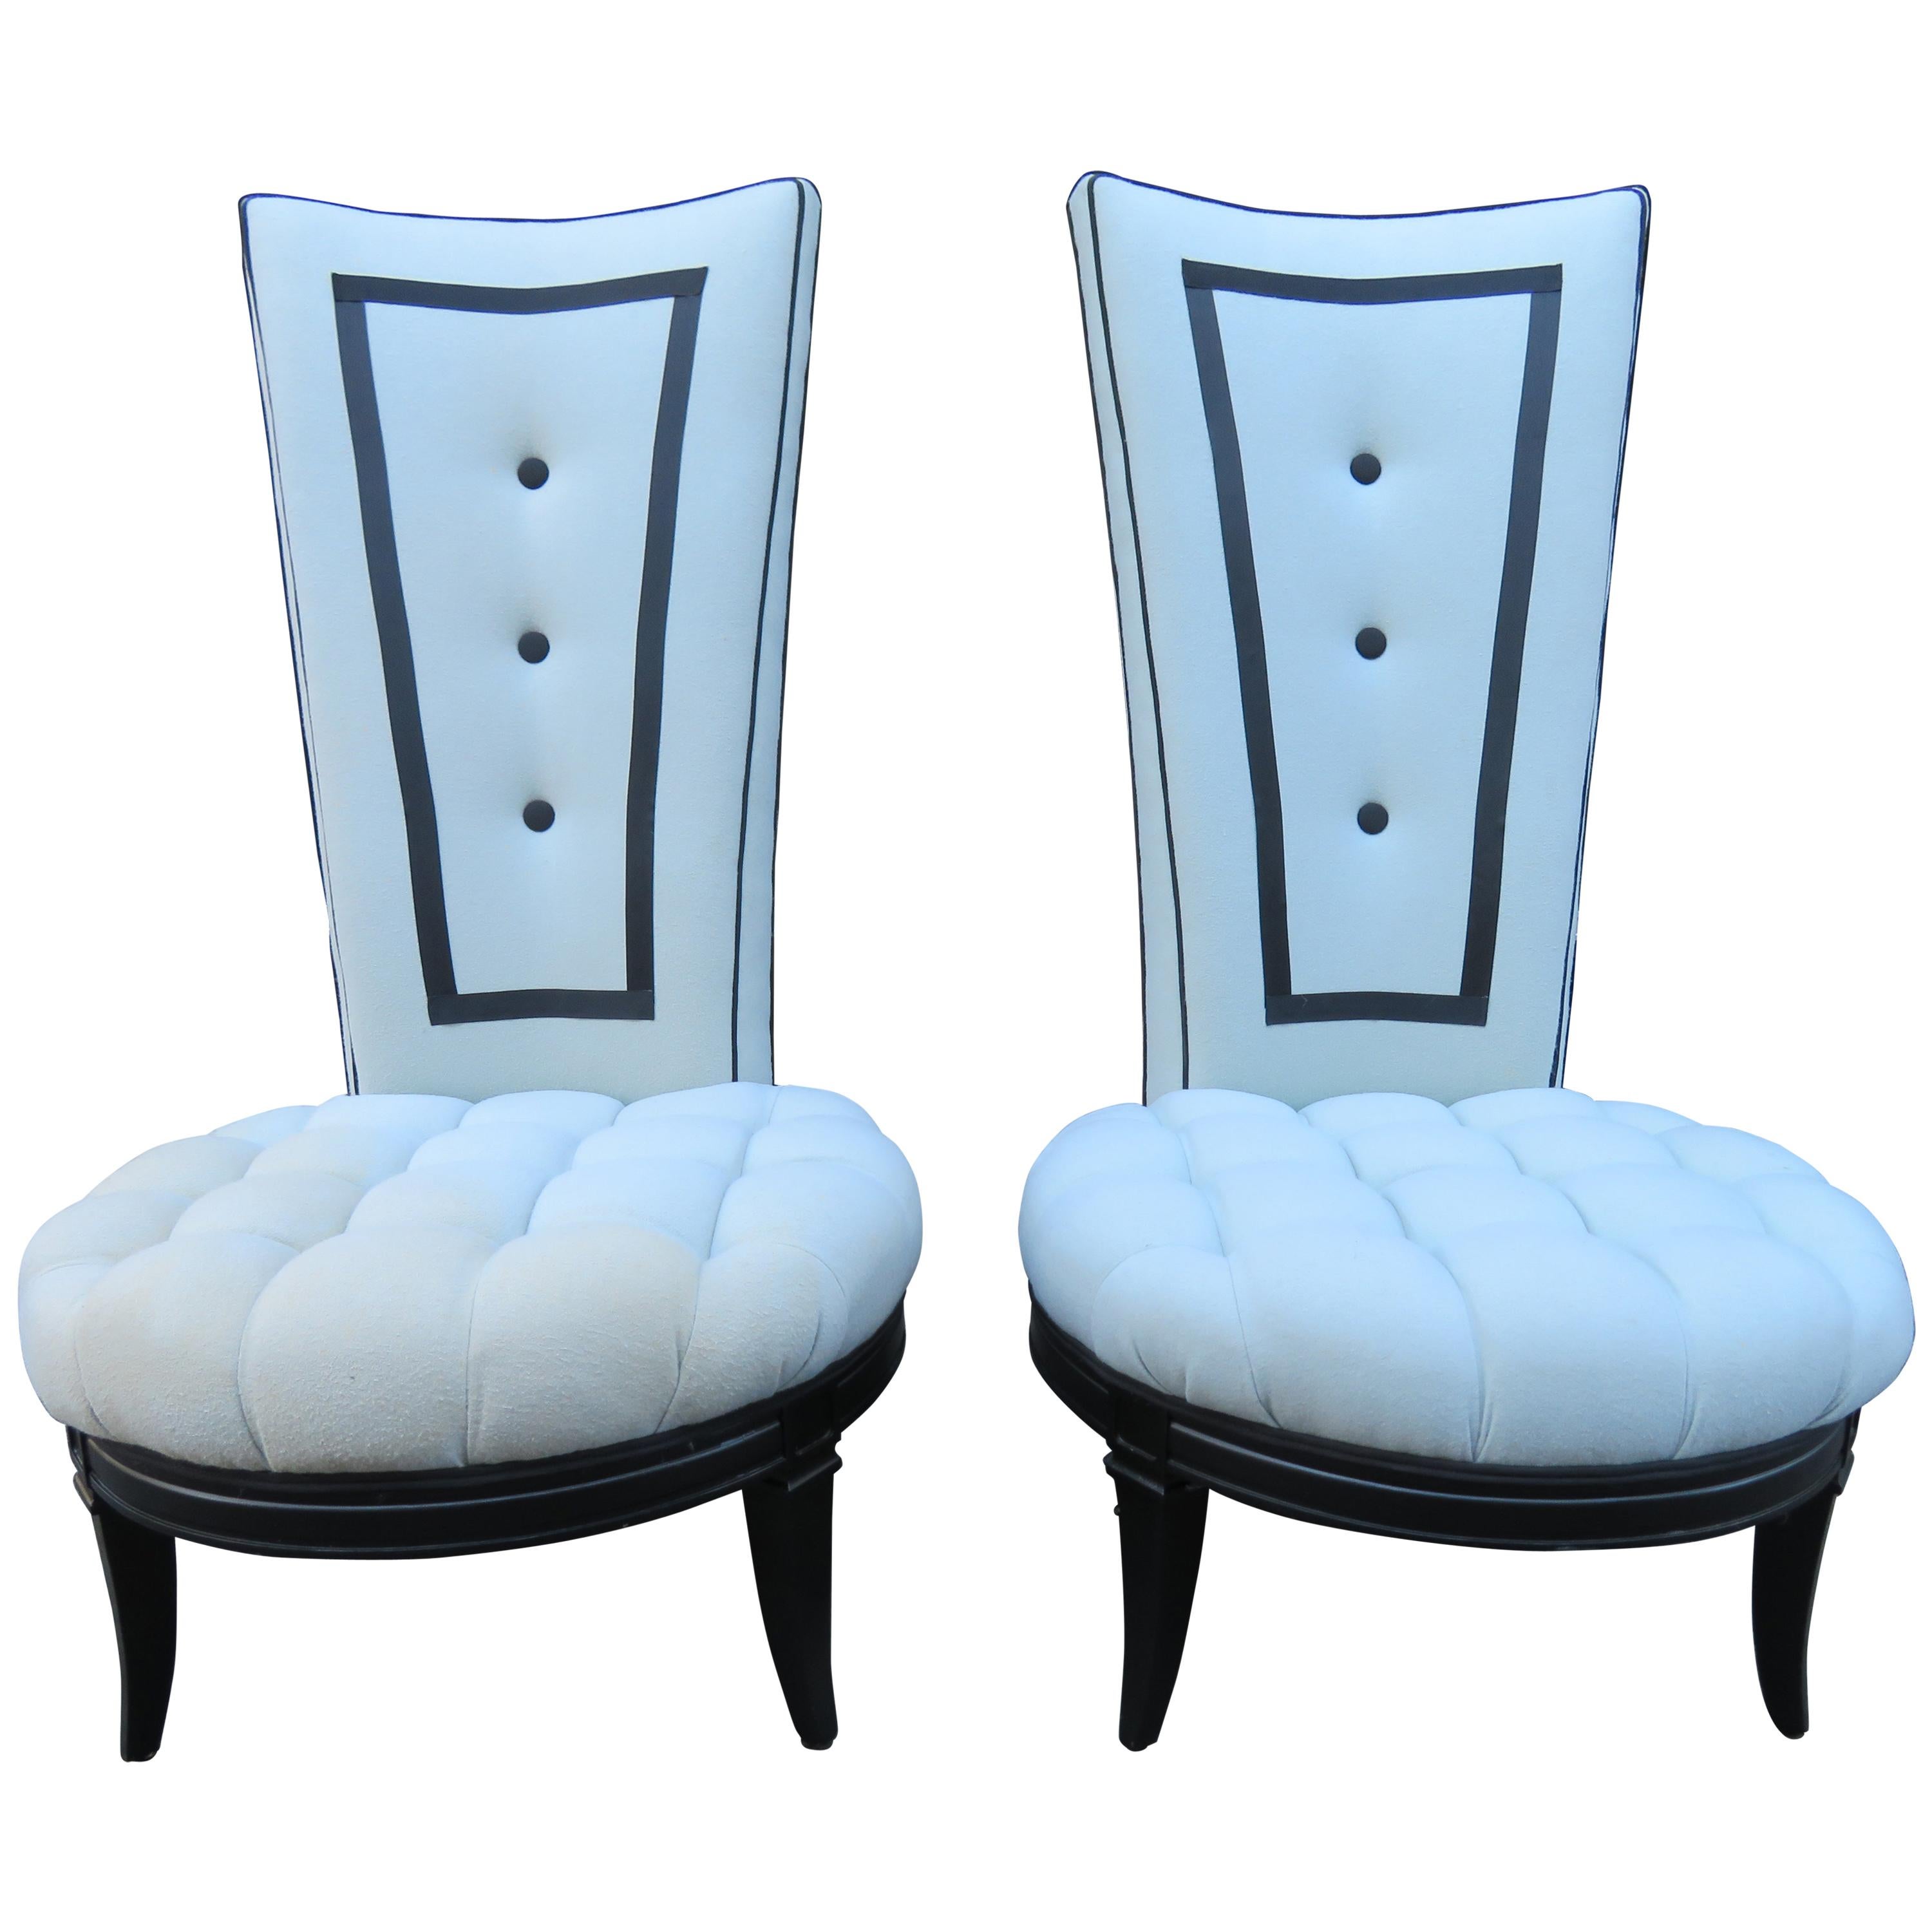 Handsome Pair Tuxedo Style Tall Back Tufted Slipper Chairs Hollywood Regency